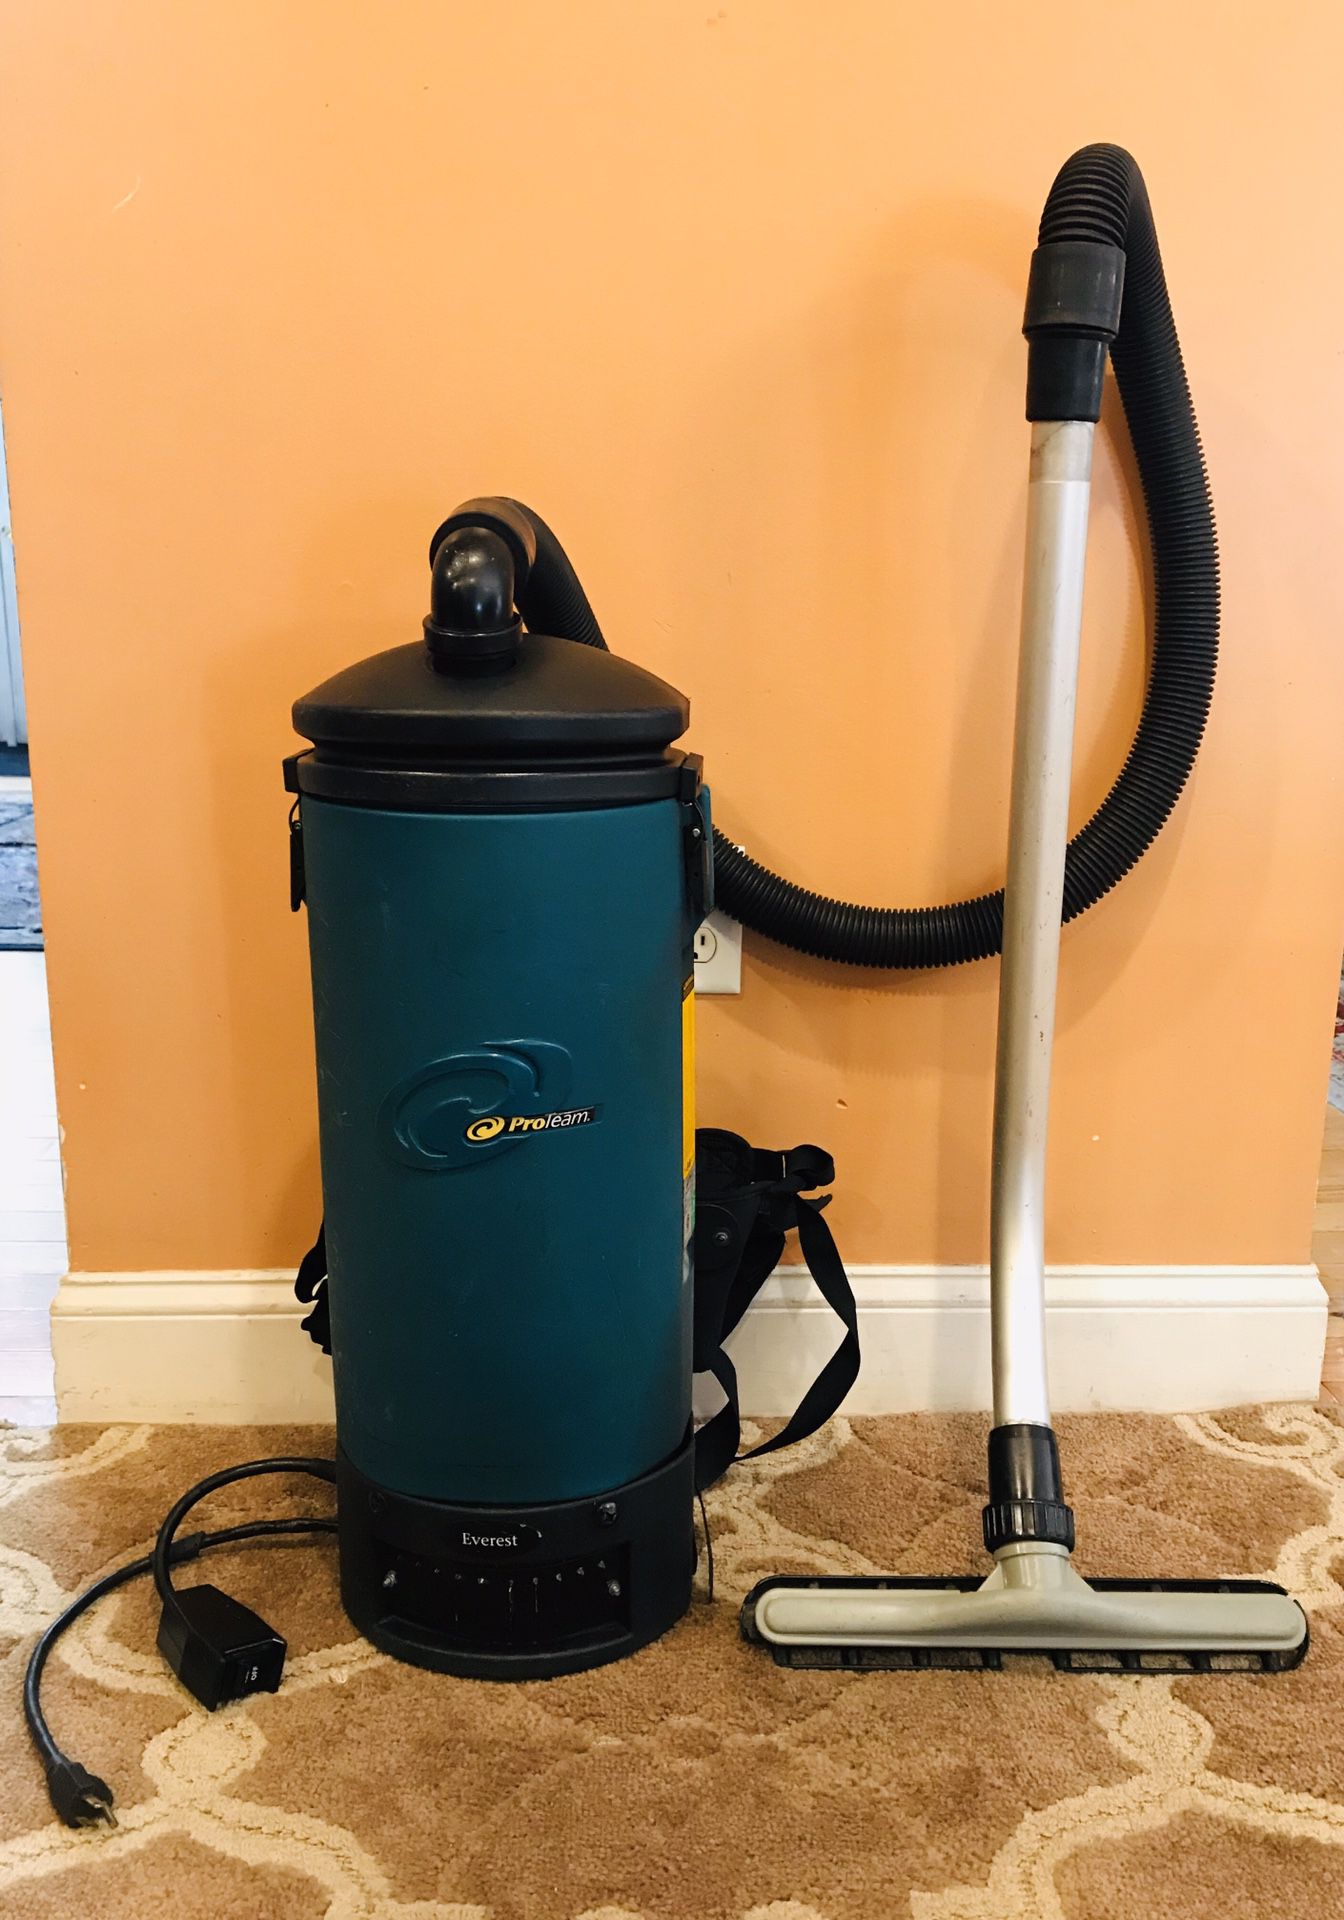 Proteam Everest Backpack Vacuum Cleaner